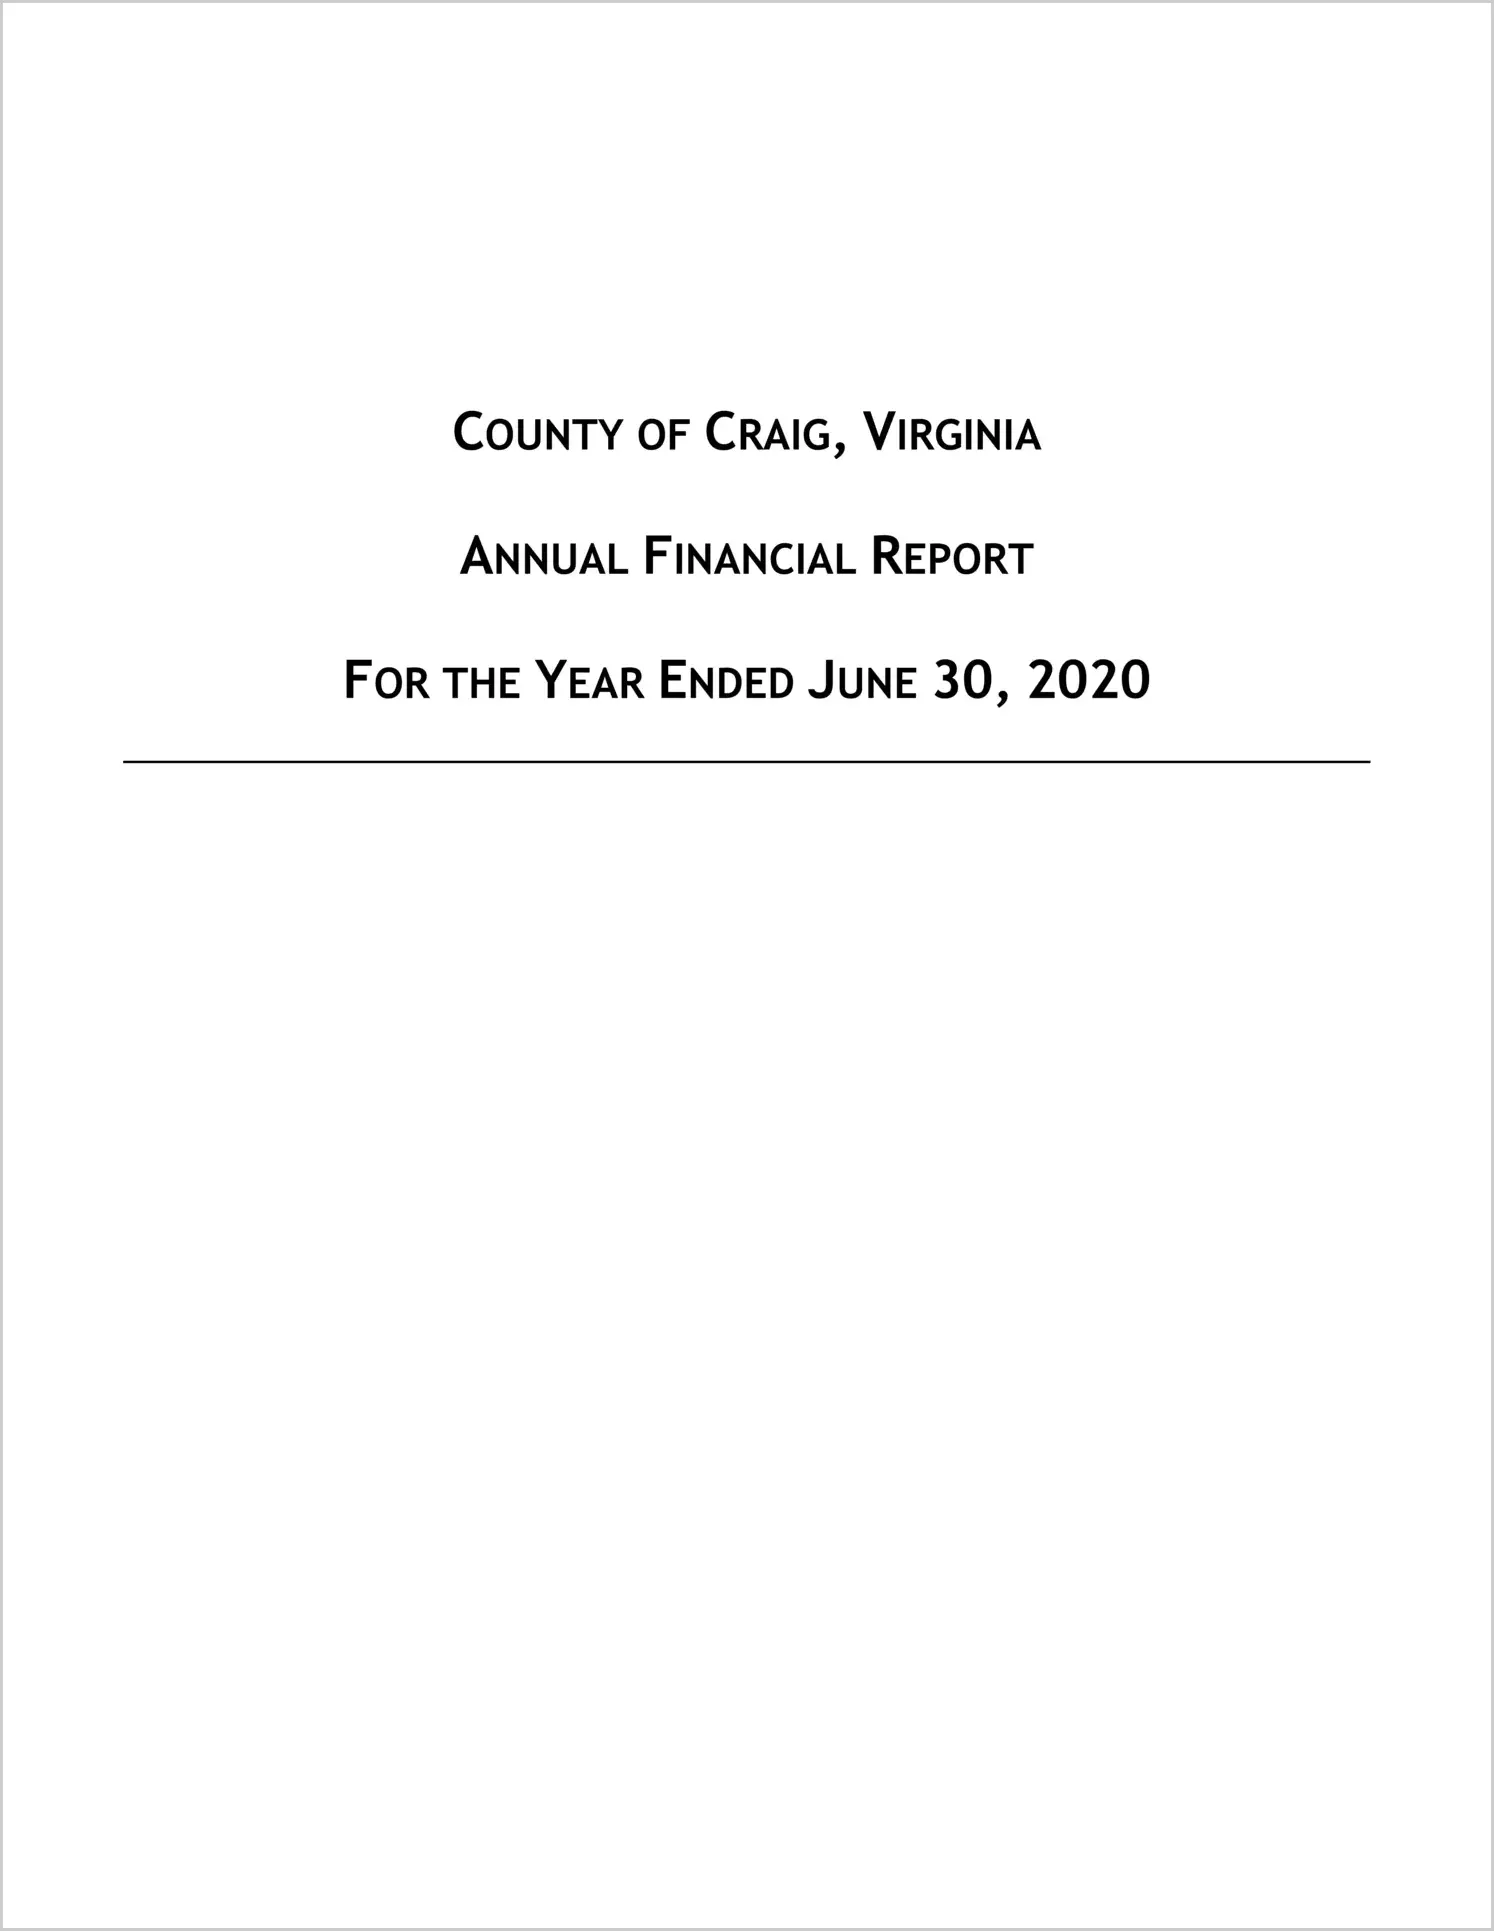 2020 Annual Financial Report for County of Craig